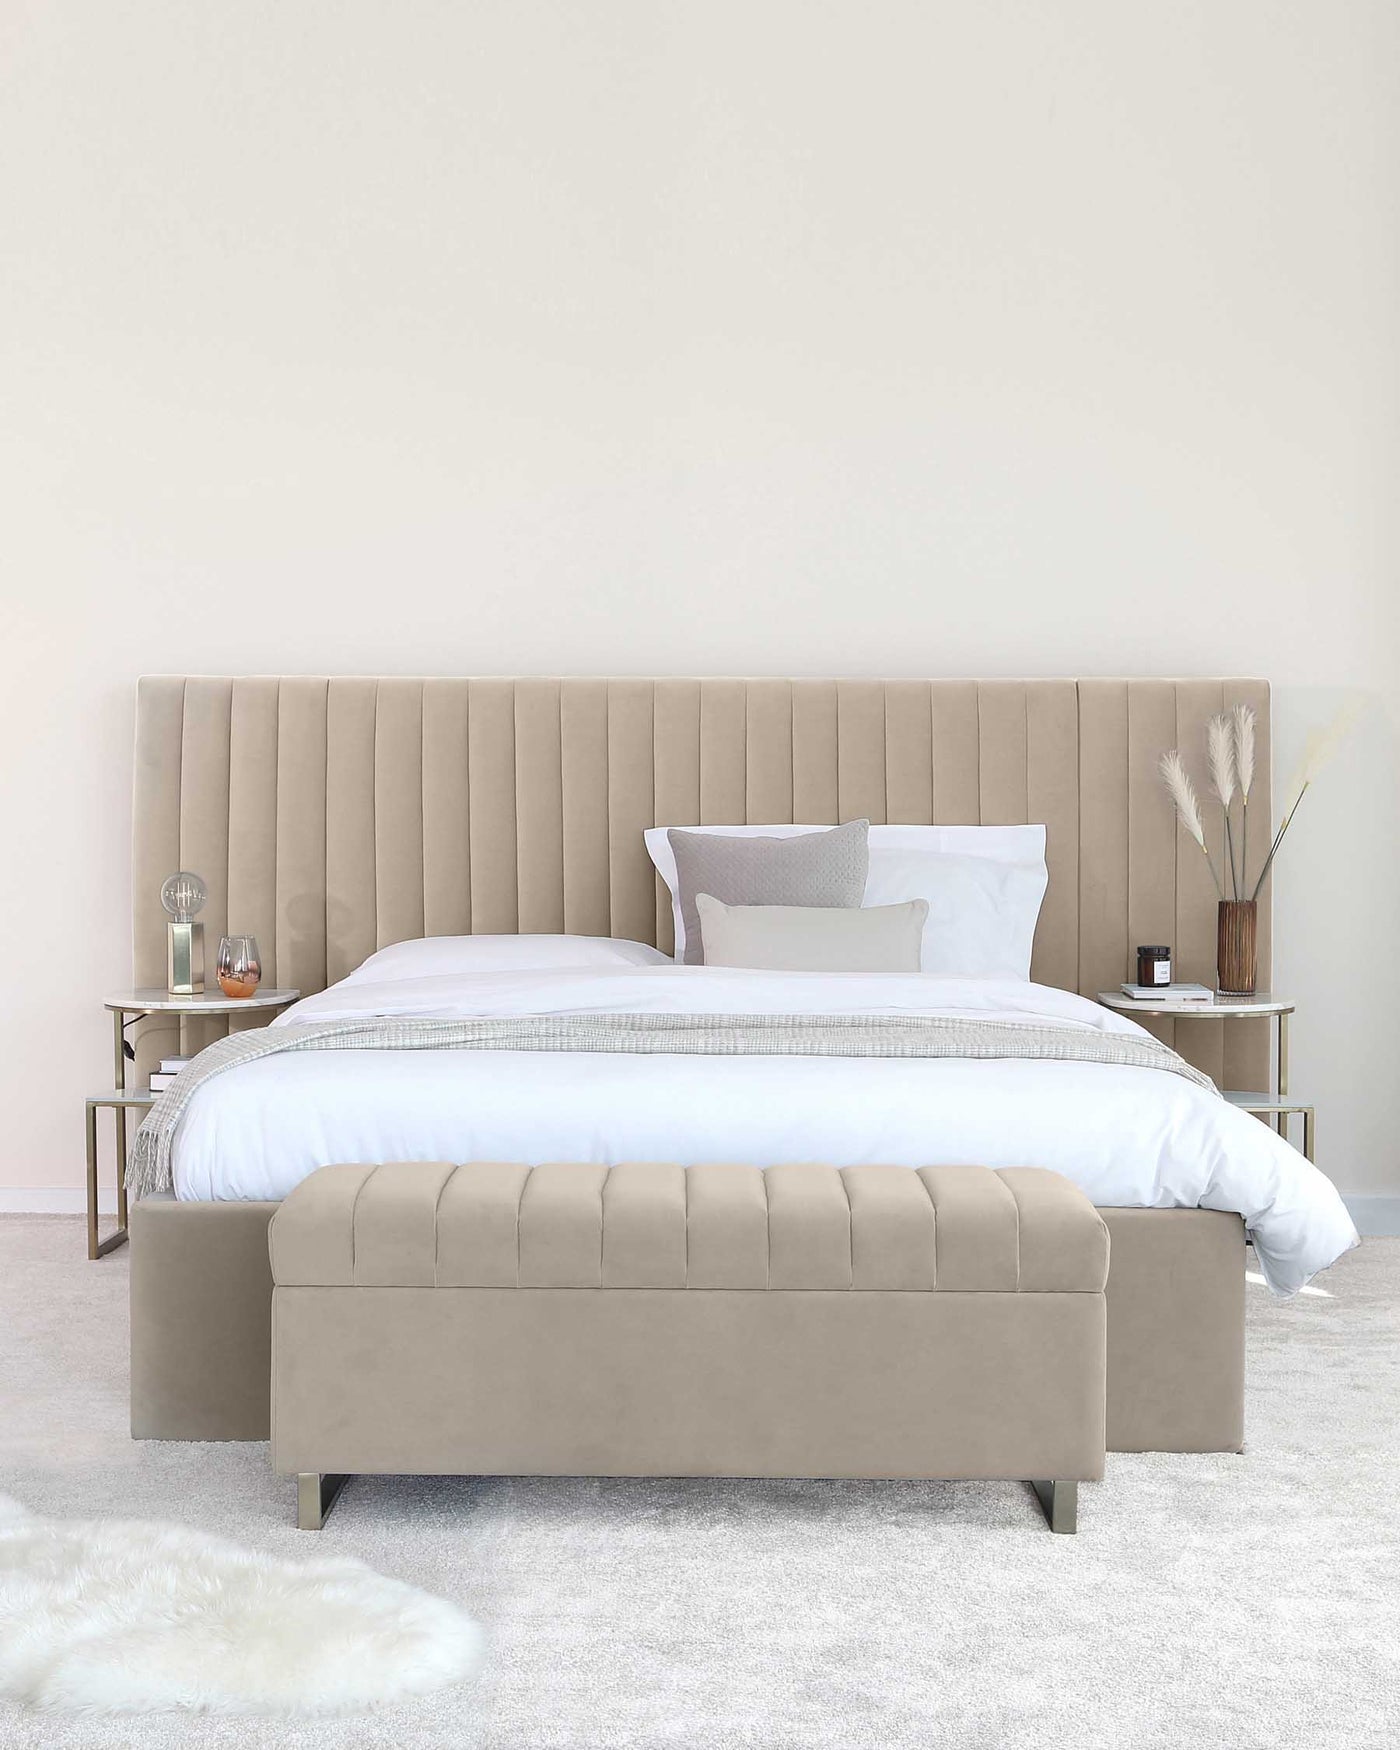 Elegant neutral-toned bedroom featuring a contemporary upholstered bed frame with a high vertical channel-tufted headboard and matching footboard. Accompanied by a clean-lined metallic bedside table with a glass top. Coordinated bedding and minimalistic décor accentuate the modern aesthetic.